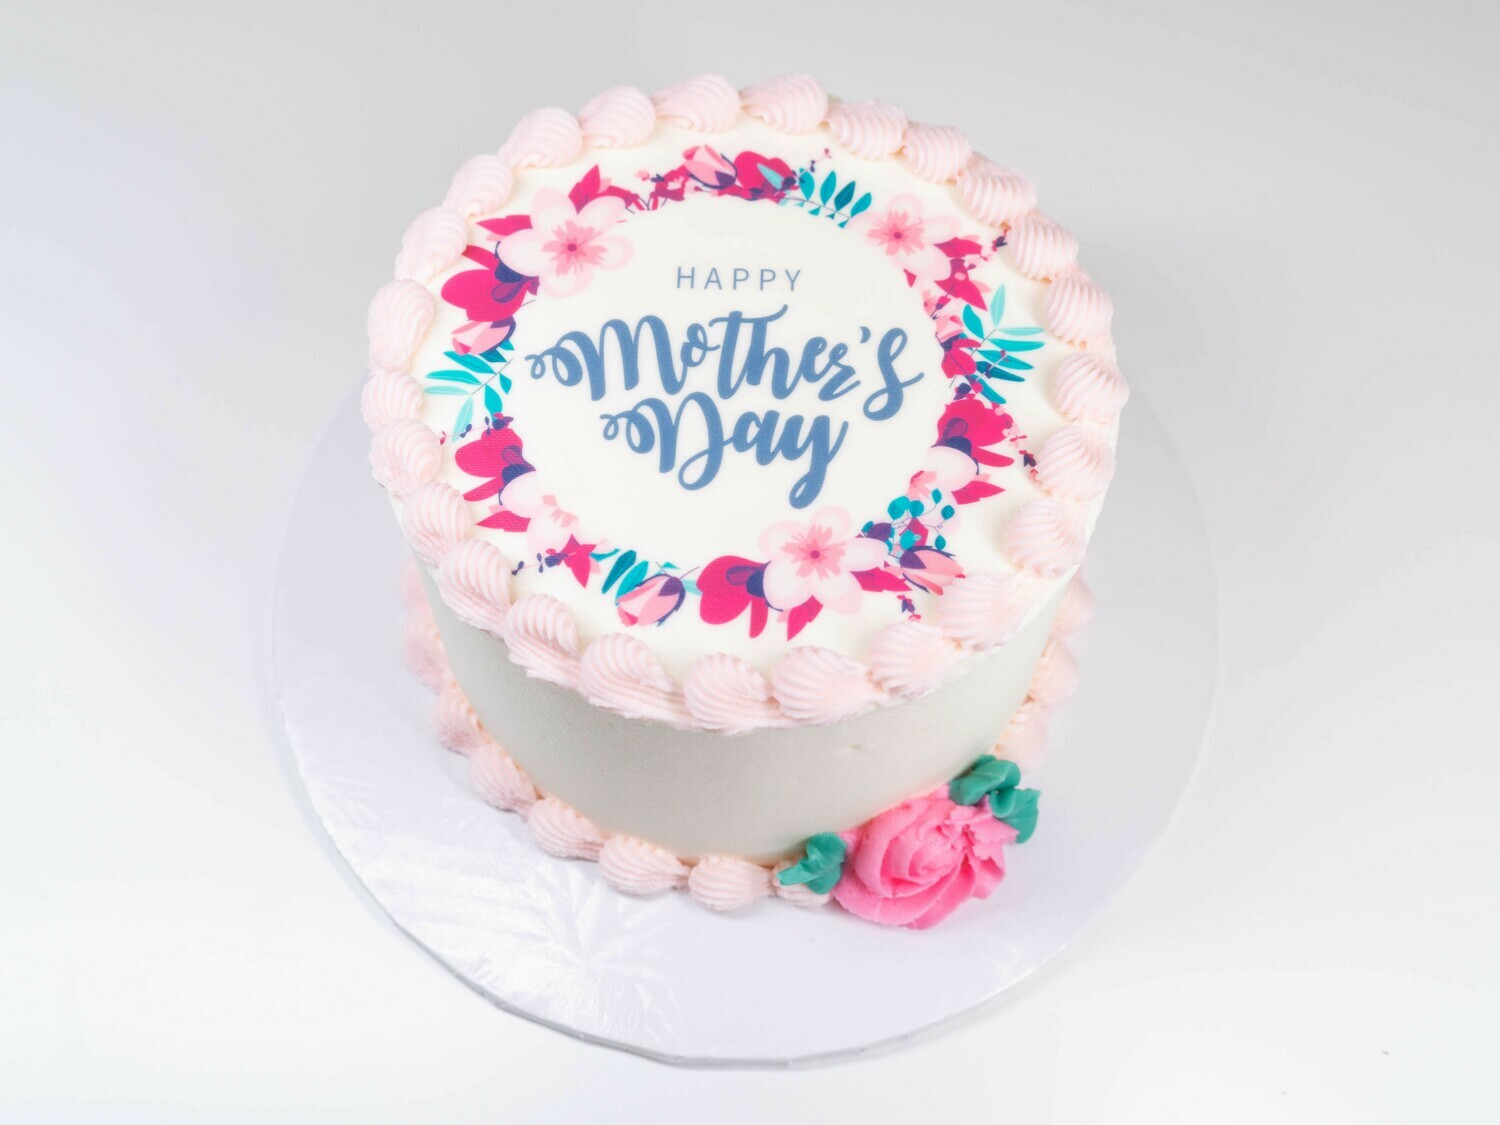 Happy Mother's Day Image Cake